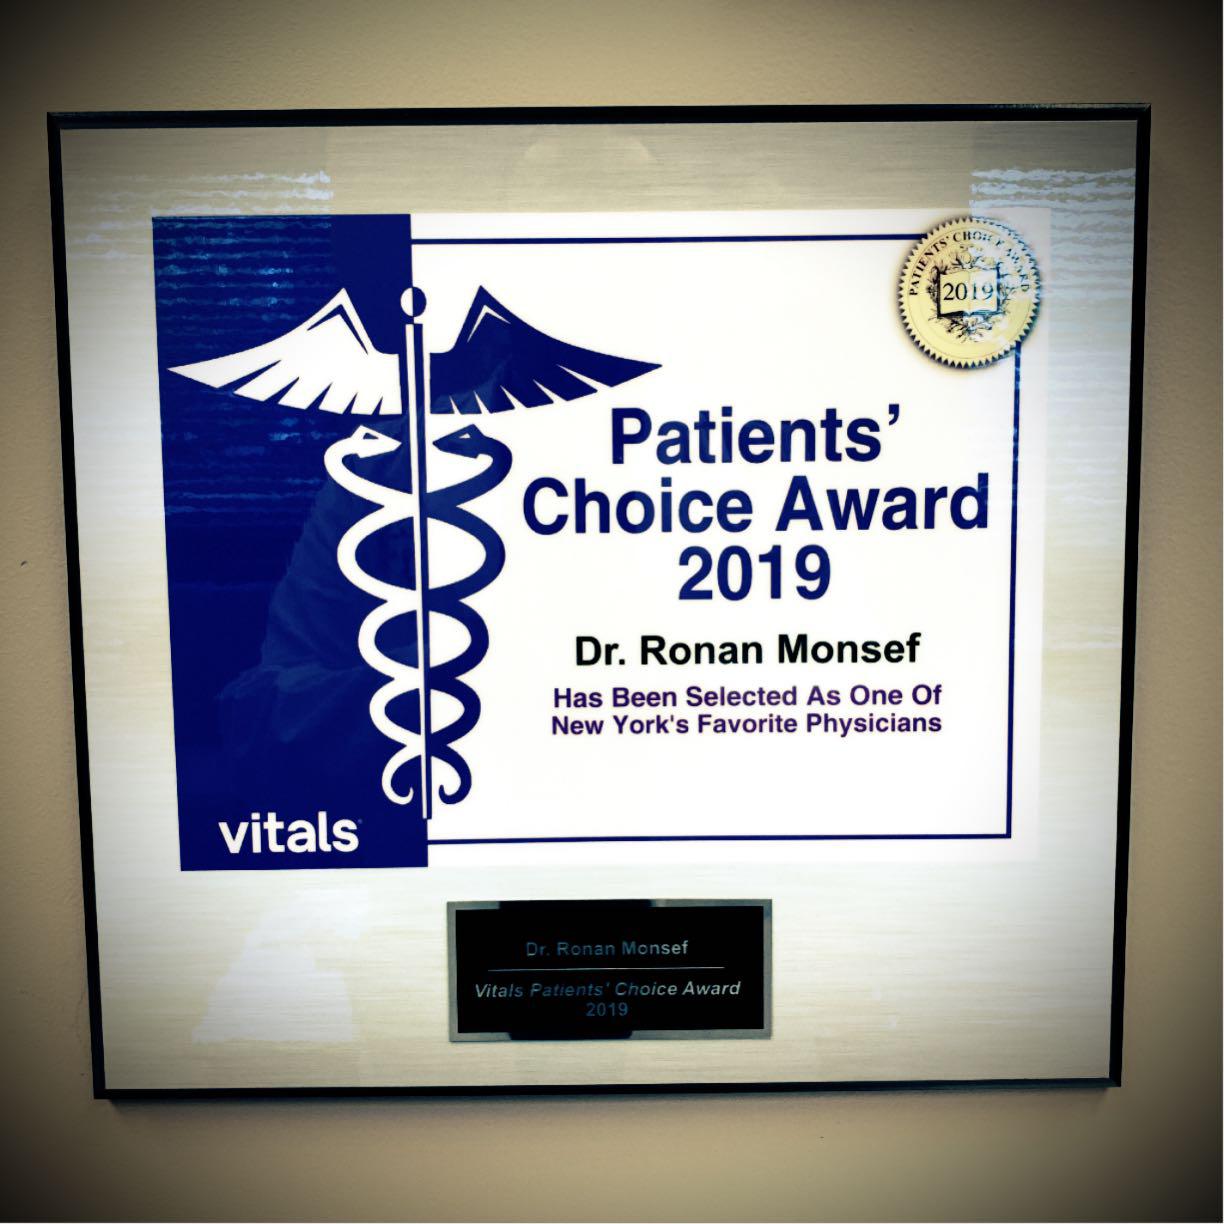 The highest honor a doctor can receive is one bestowed on him by his patients. I’m humbled and truly honored. Thank you to all my wonderful patients.